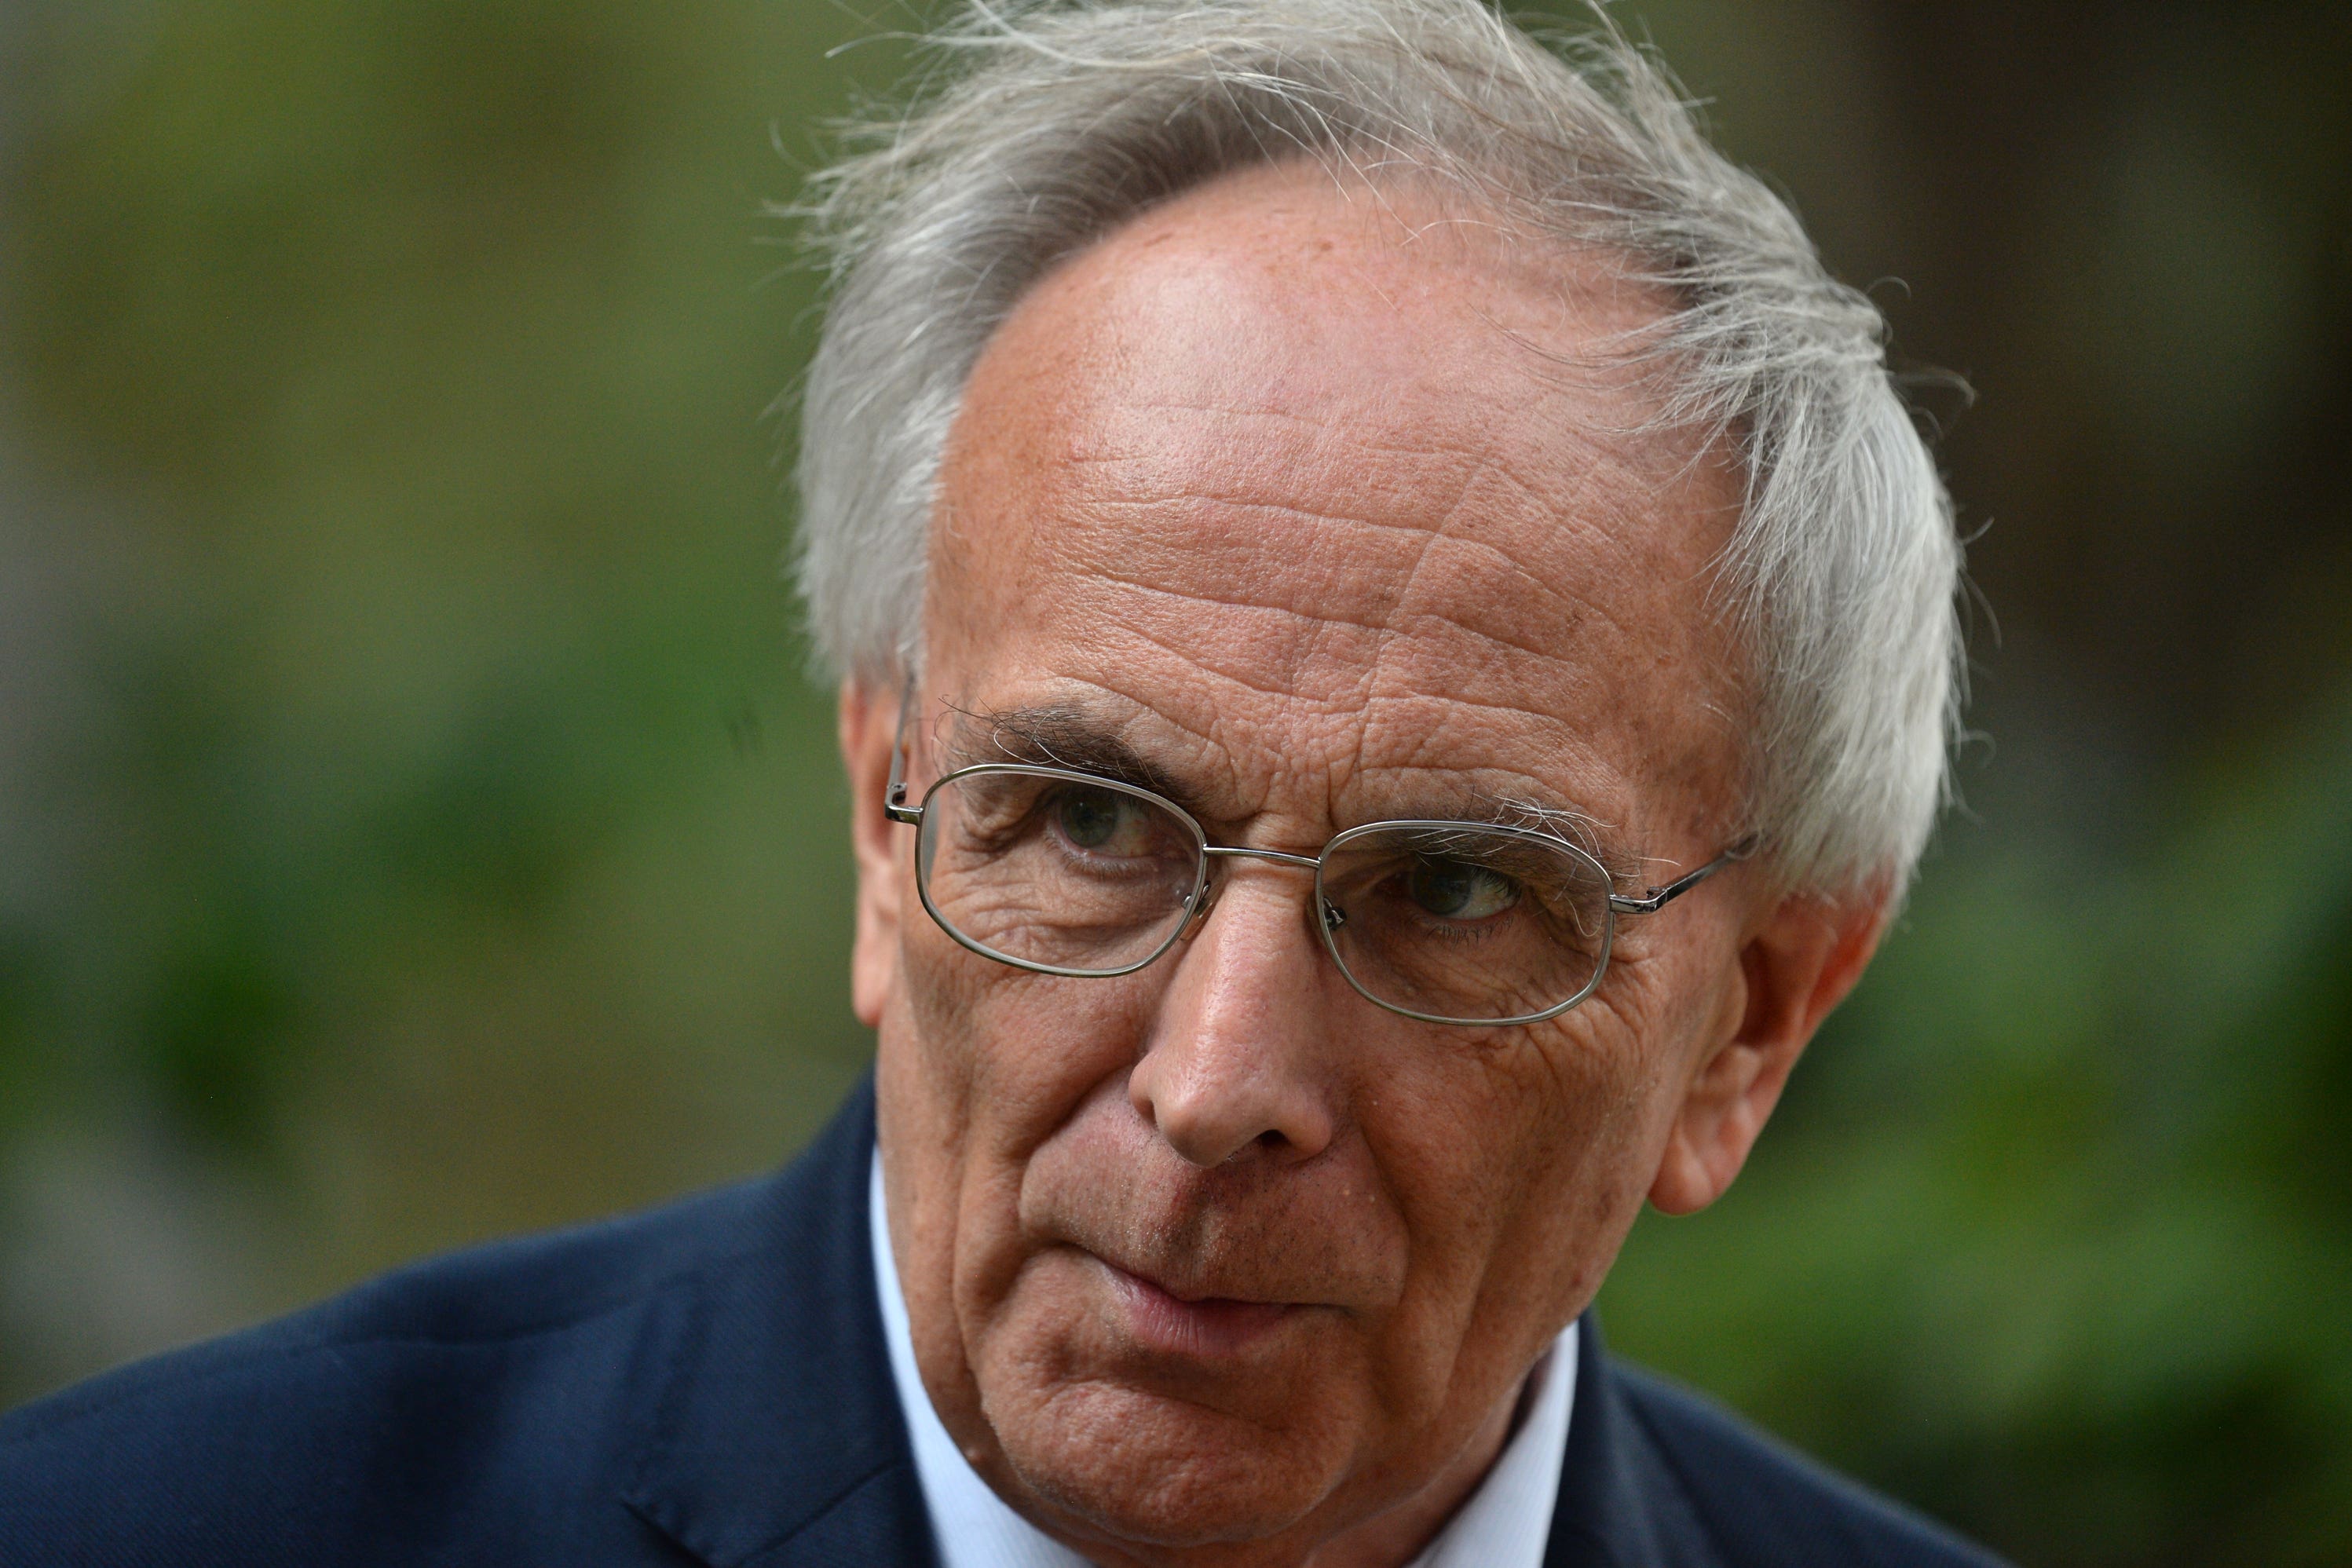 Peter Bone lost the Tory whip and was banned from parliament for six weeks for indecently exposing himself to a staffer